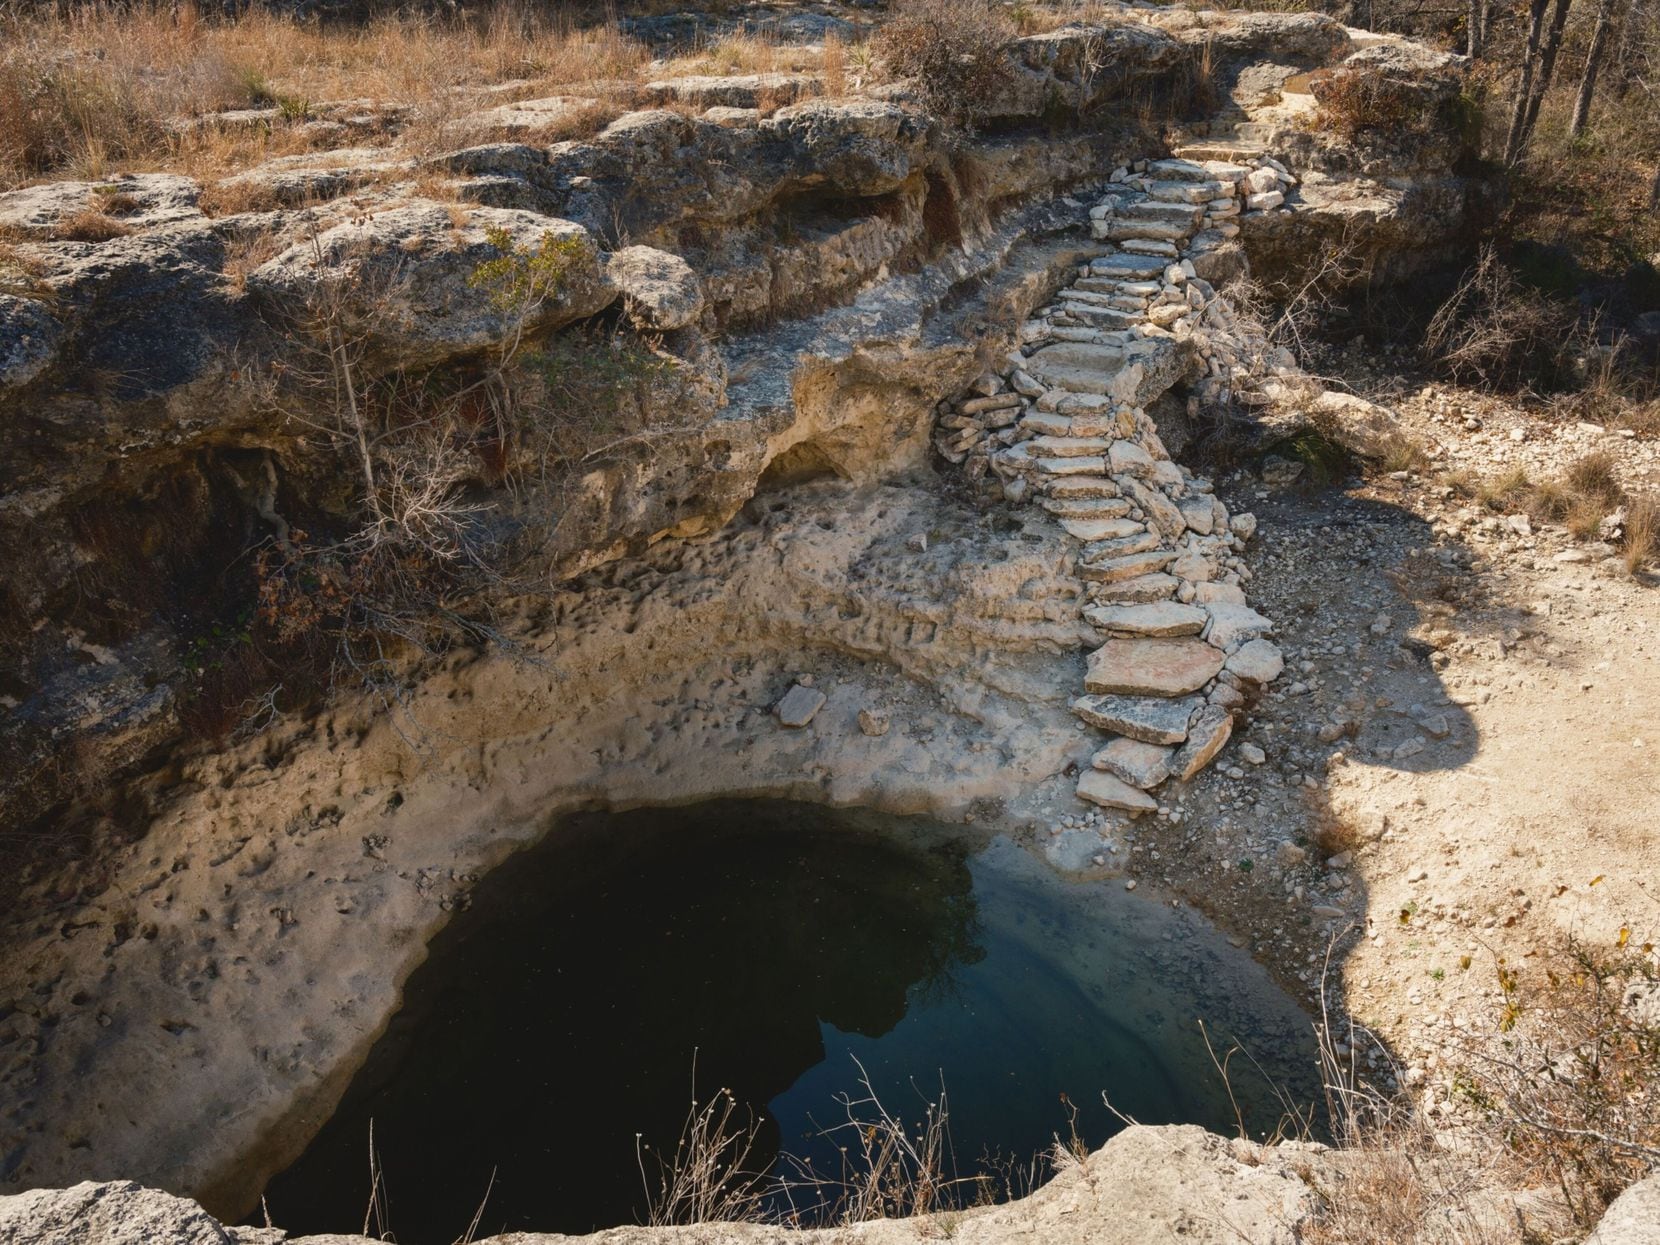 Little Dead Man's spring-fed hole would serve as a natural swimming hole at the future...